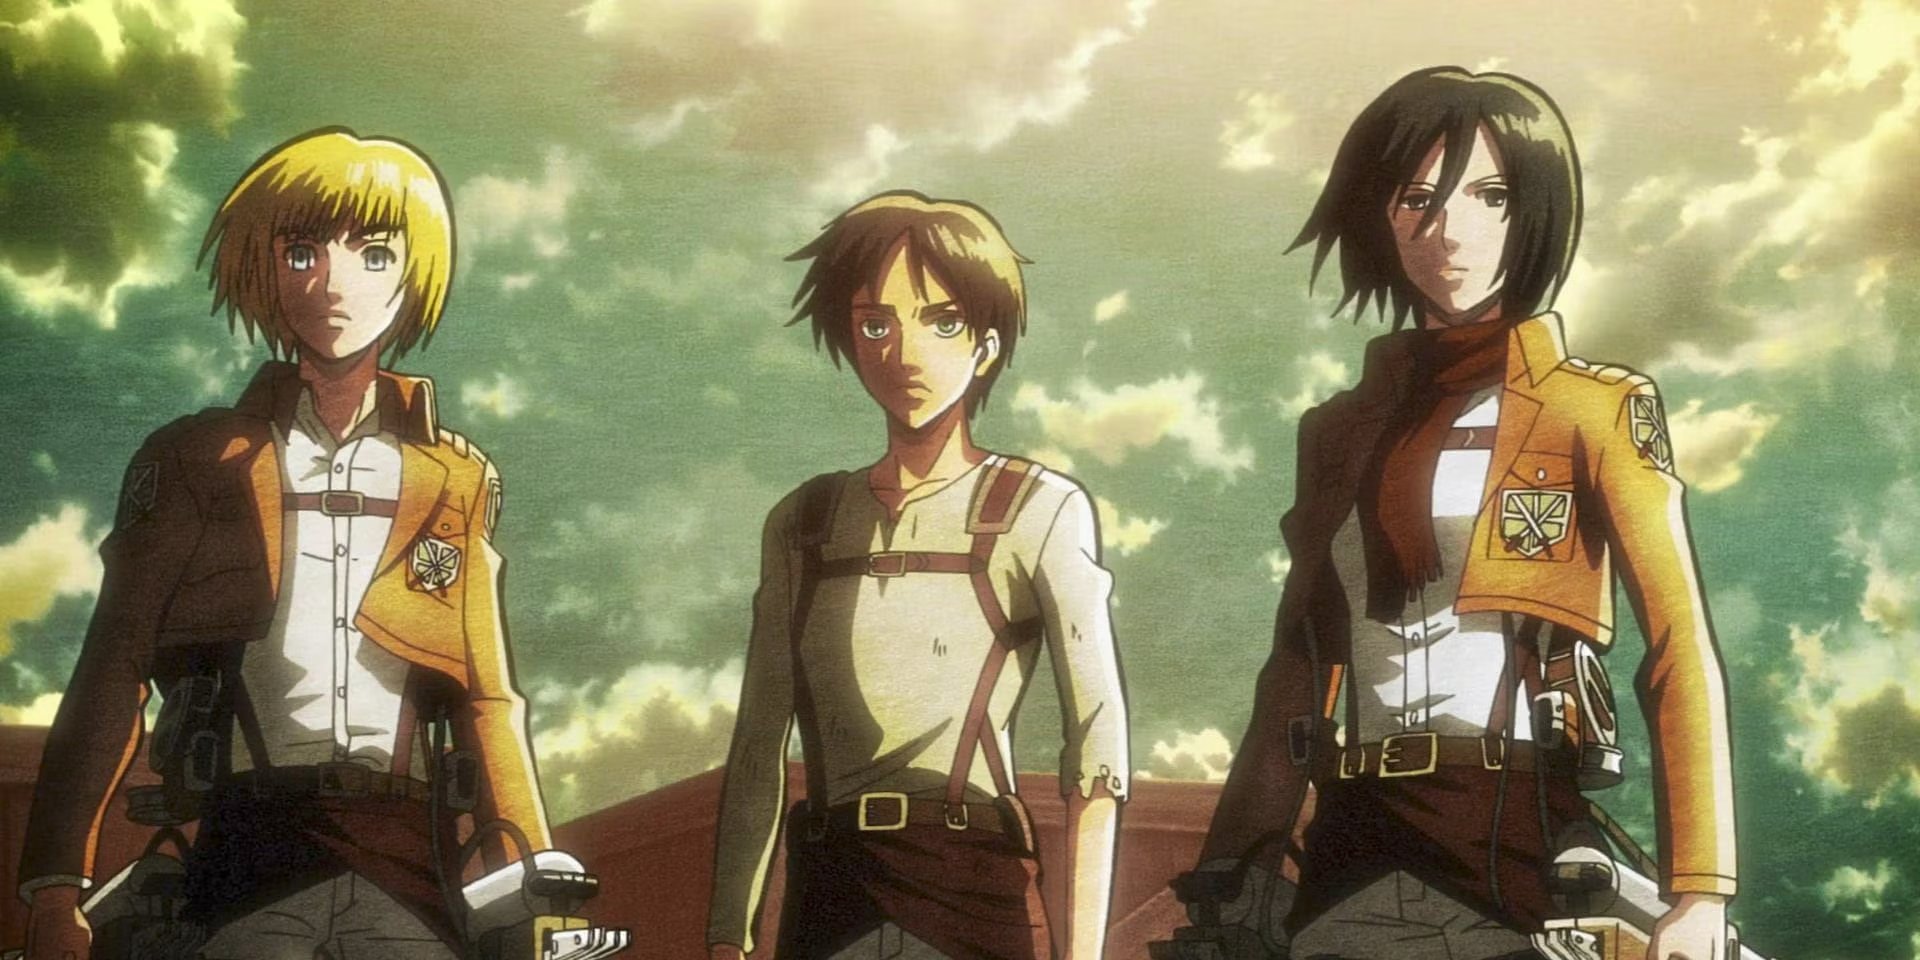 How Much Do You Know About Attack On Titan?